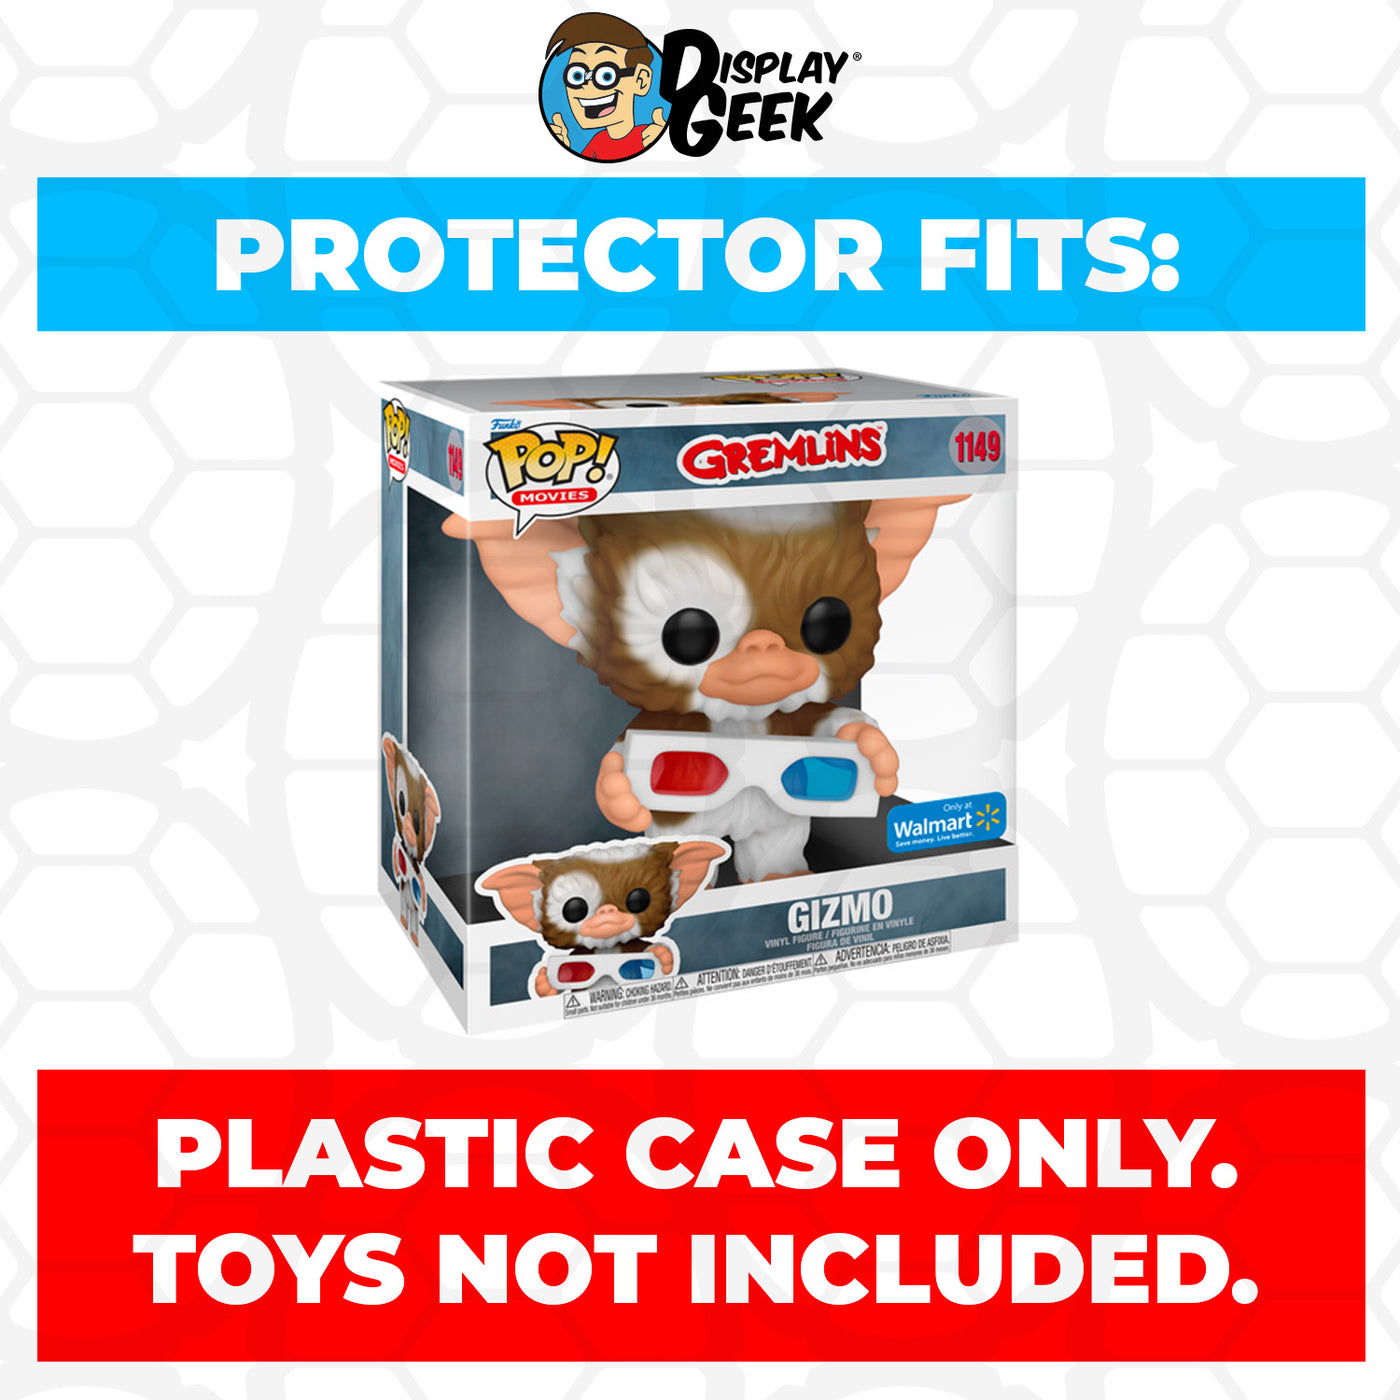 Pop Protector for 10 inch Gremlins Gizmo #1149 Jumbo Funko Pop on The Protector Guide App by Display Geek